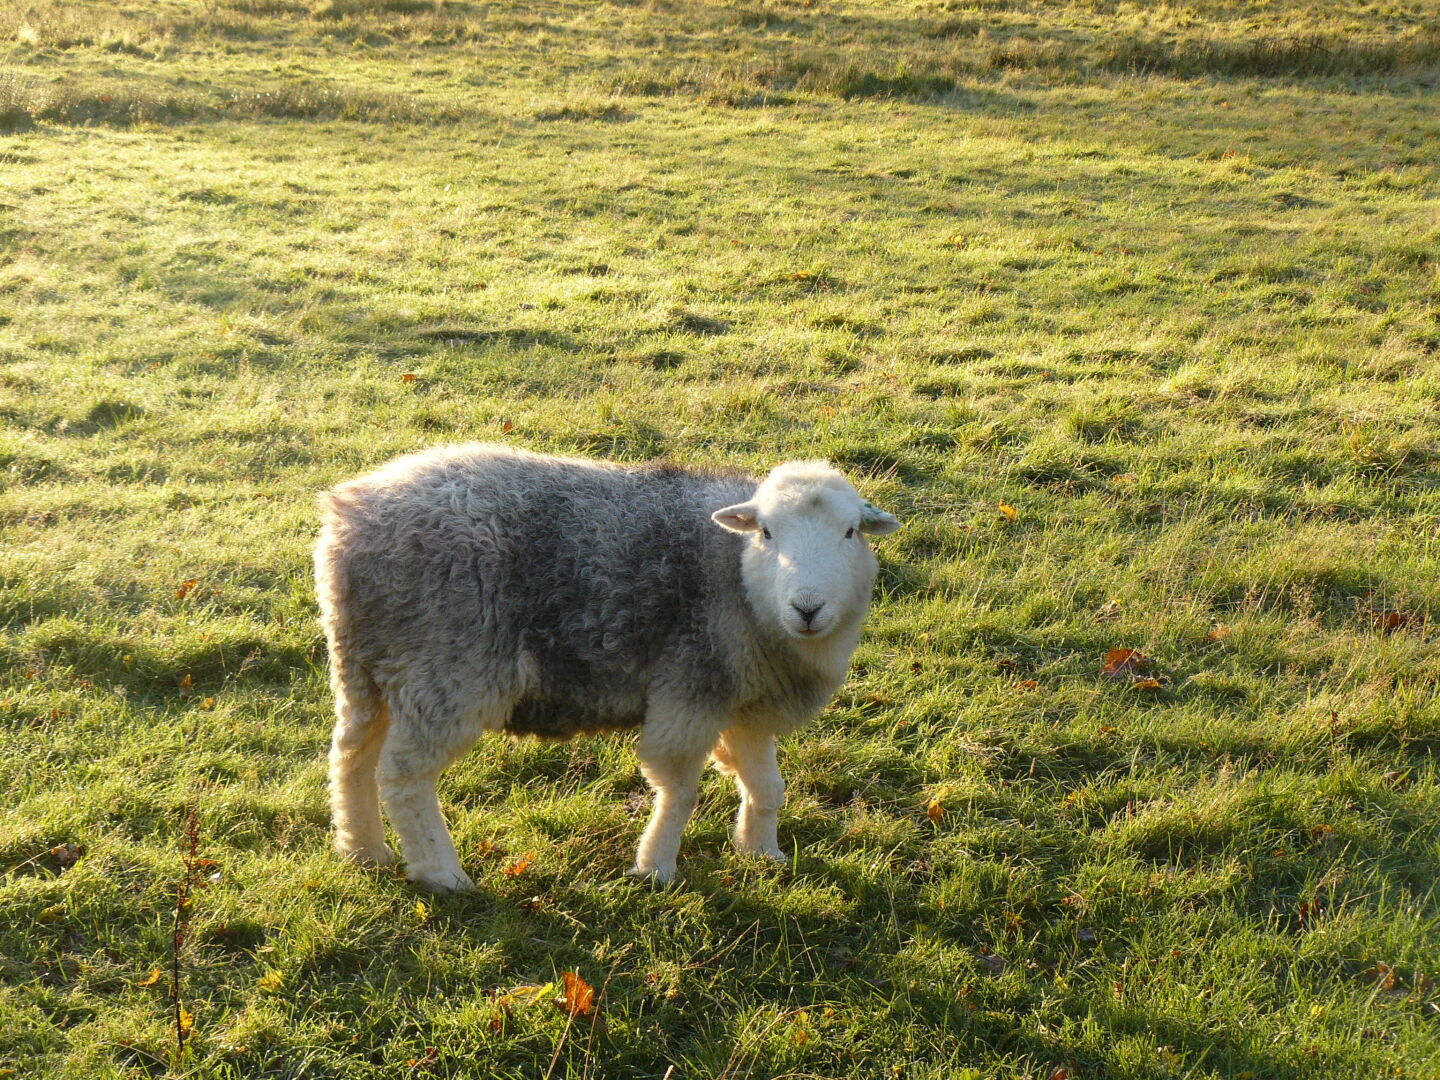 One of the Herdwick sheep, they are so funny with their wooly legs!